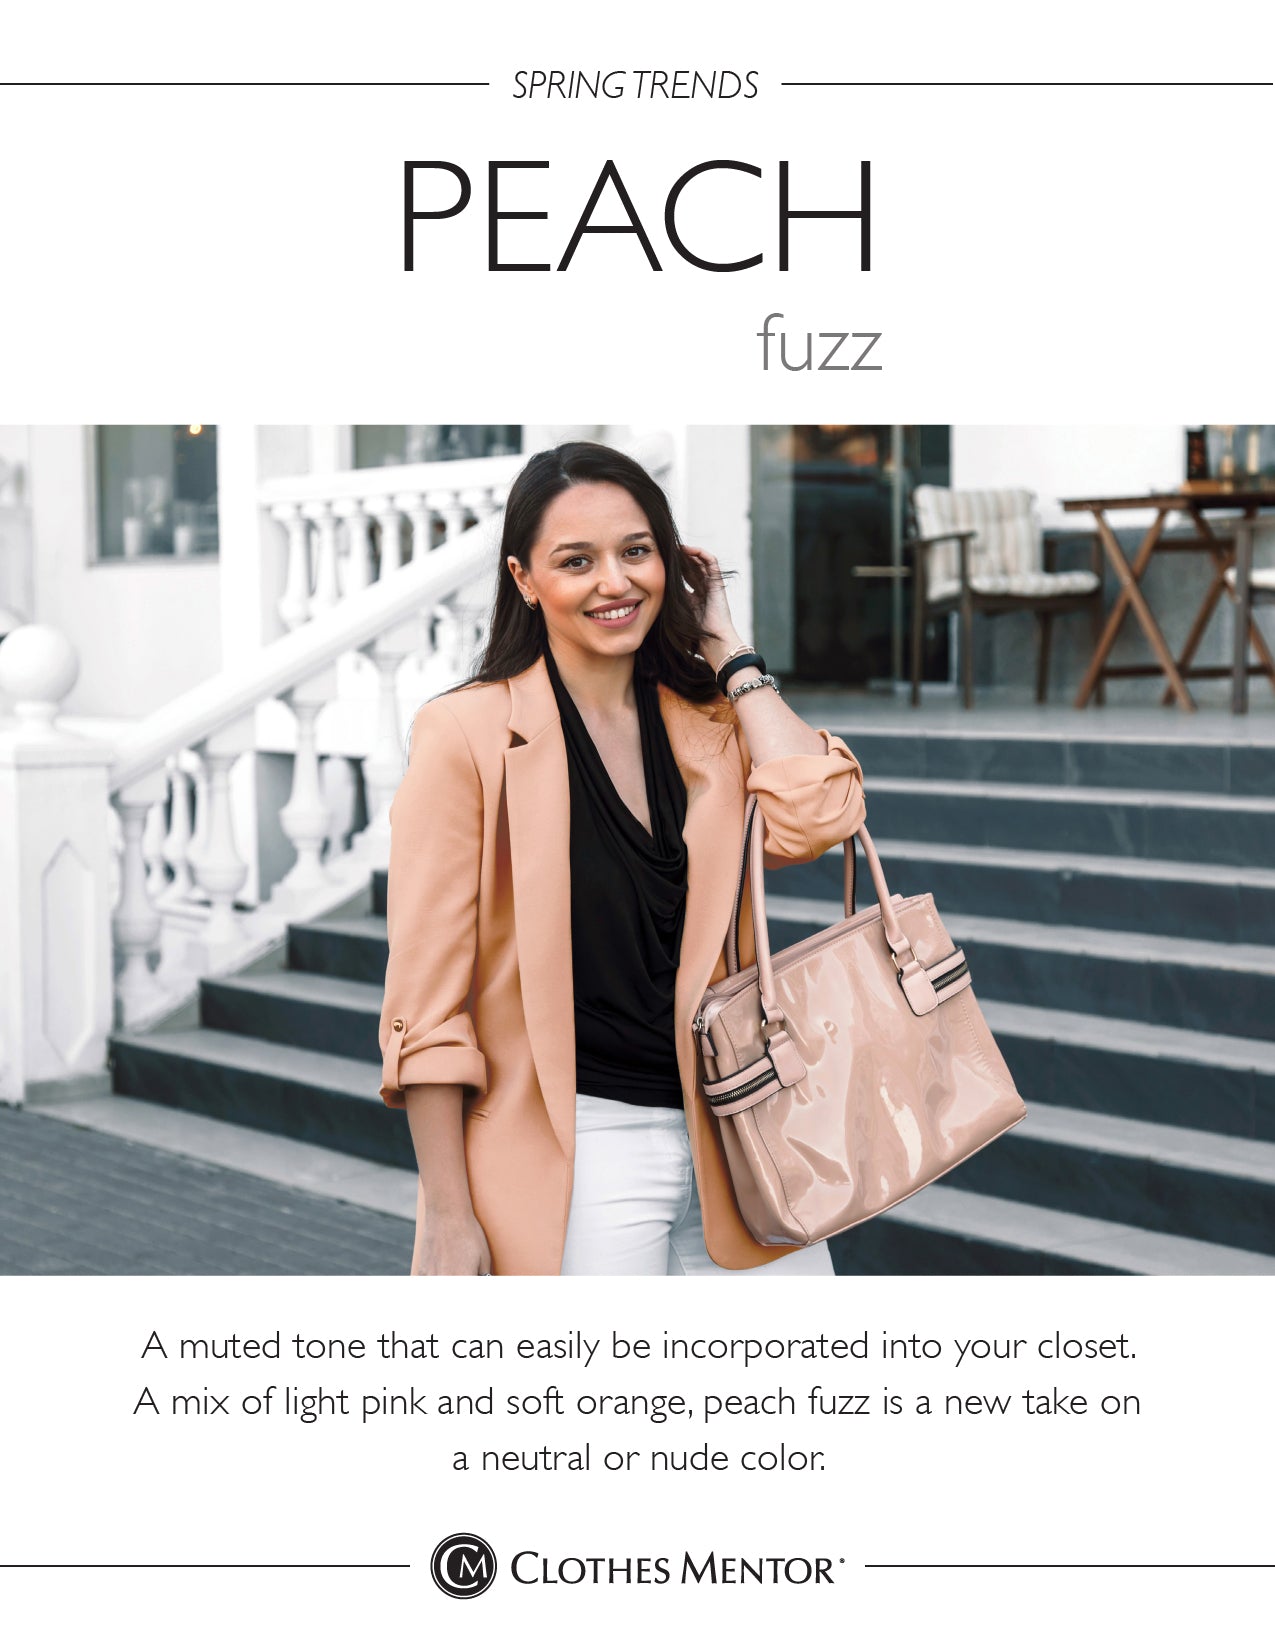 Woman Wearing a Peach Colored Jacket